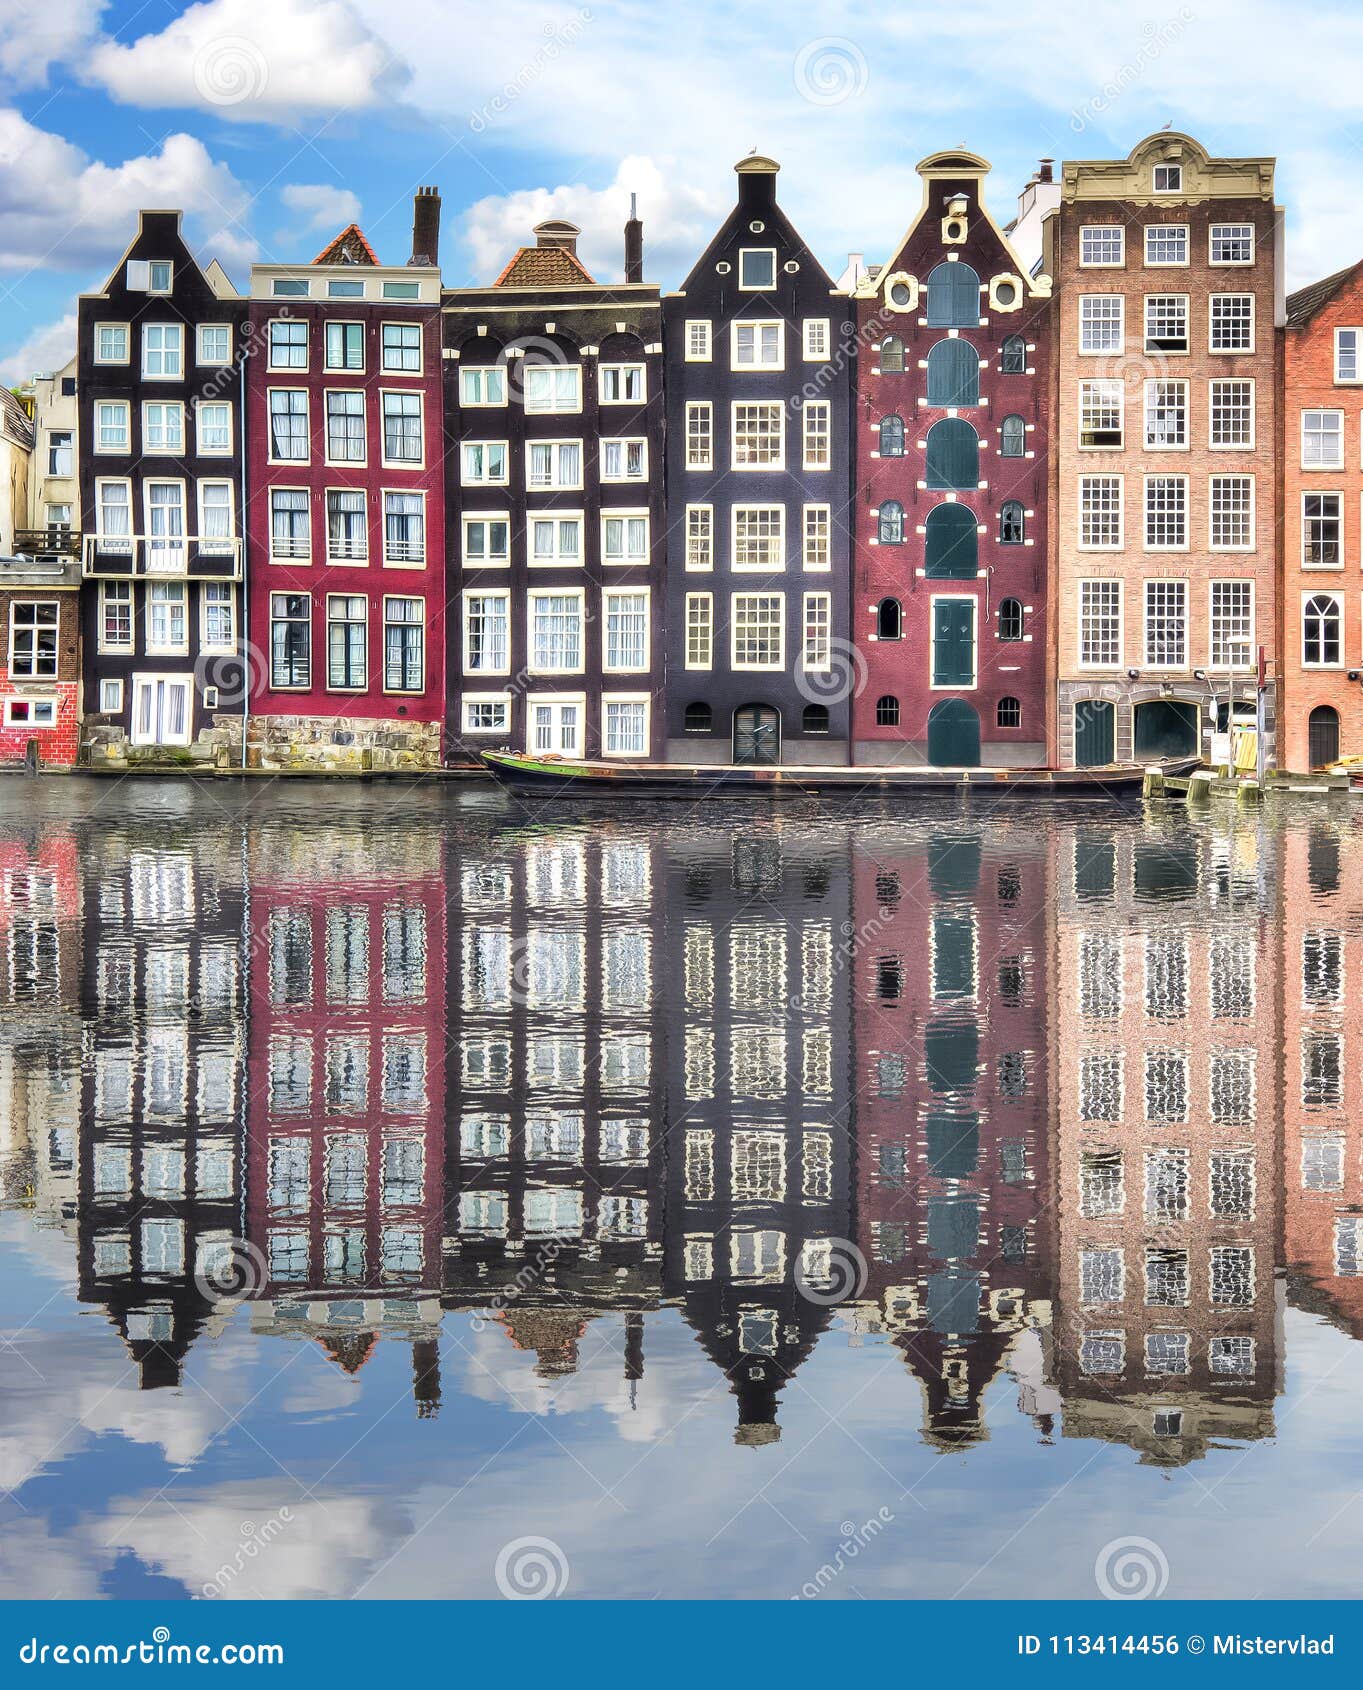 Amsterdam with Reflection in Canal, Netherlands Photo - Image amsterdam, dancing: 113414456